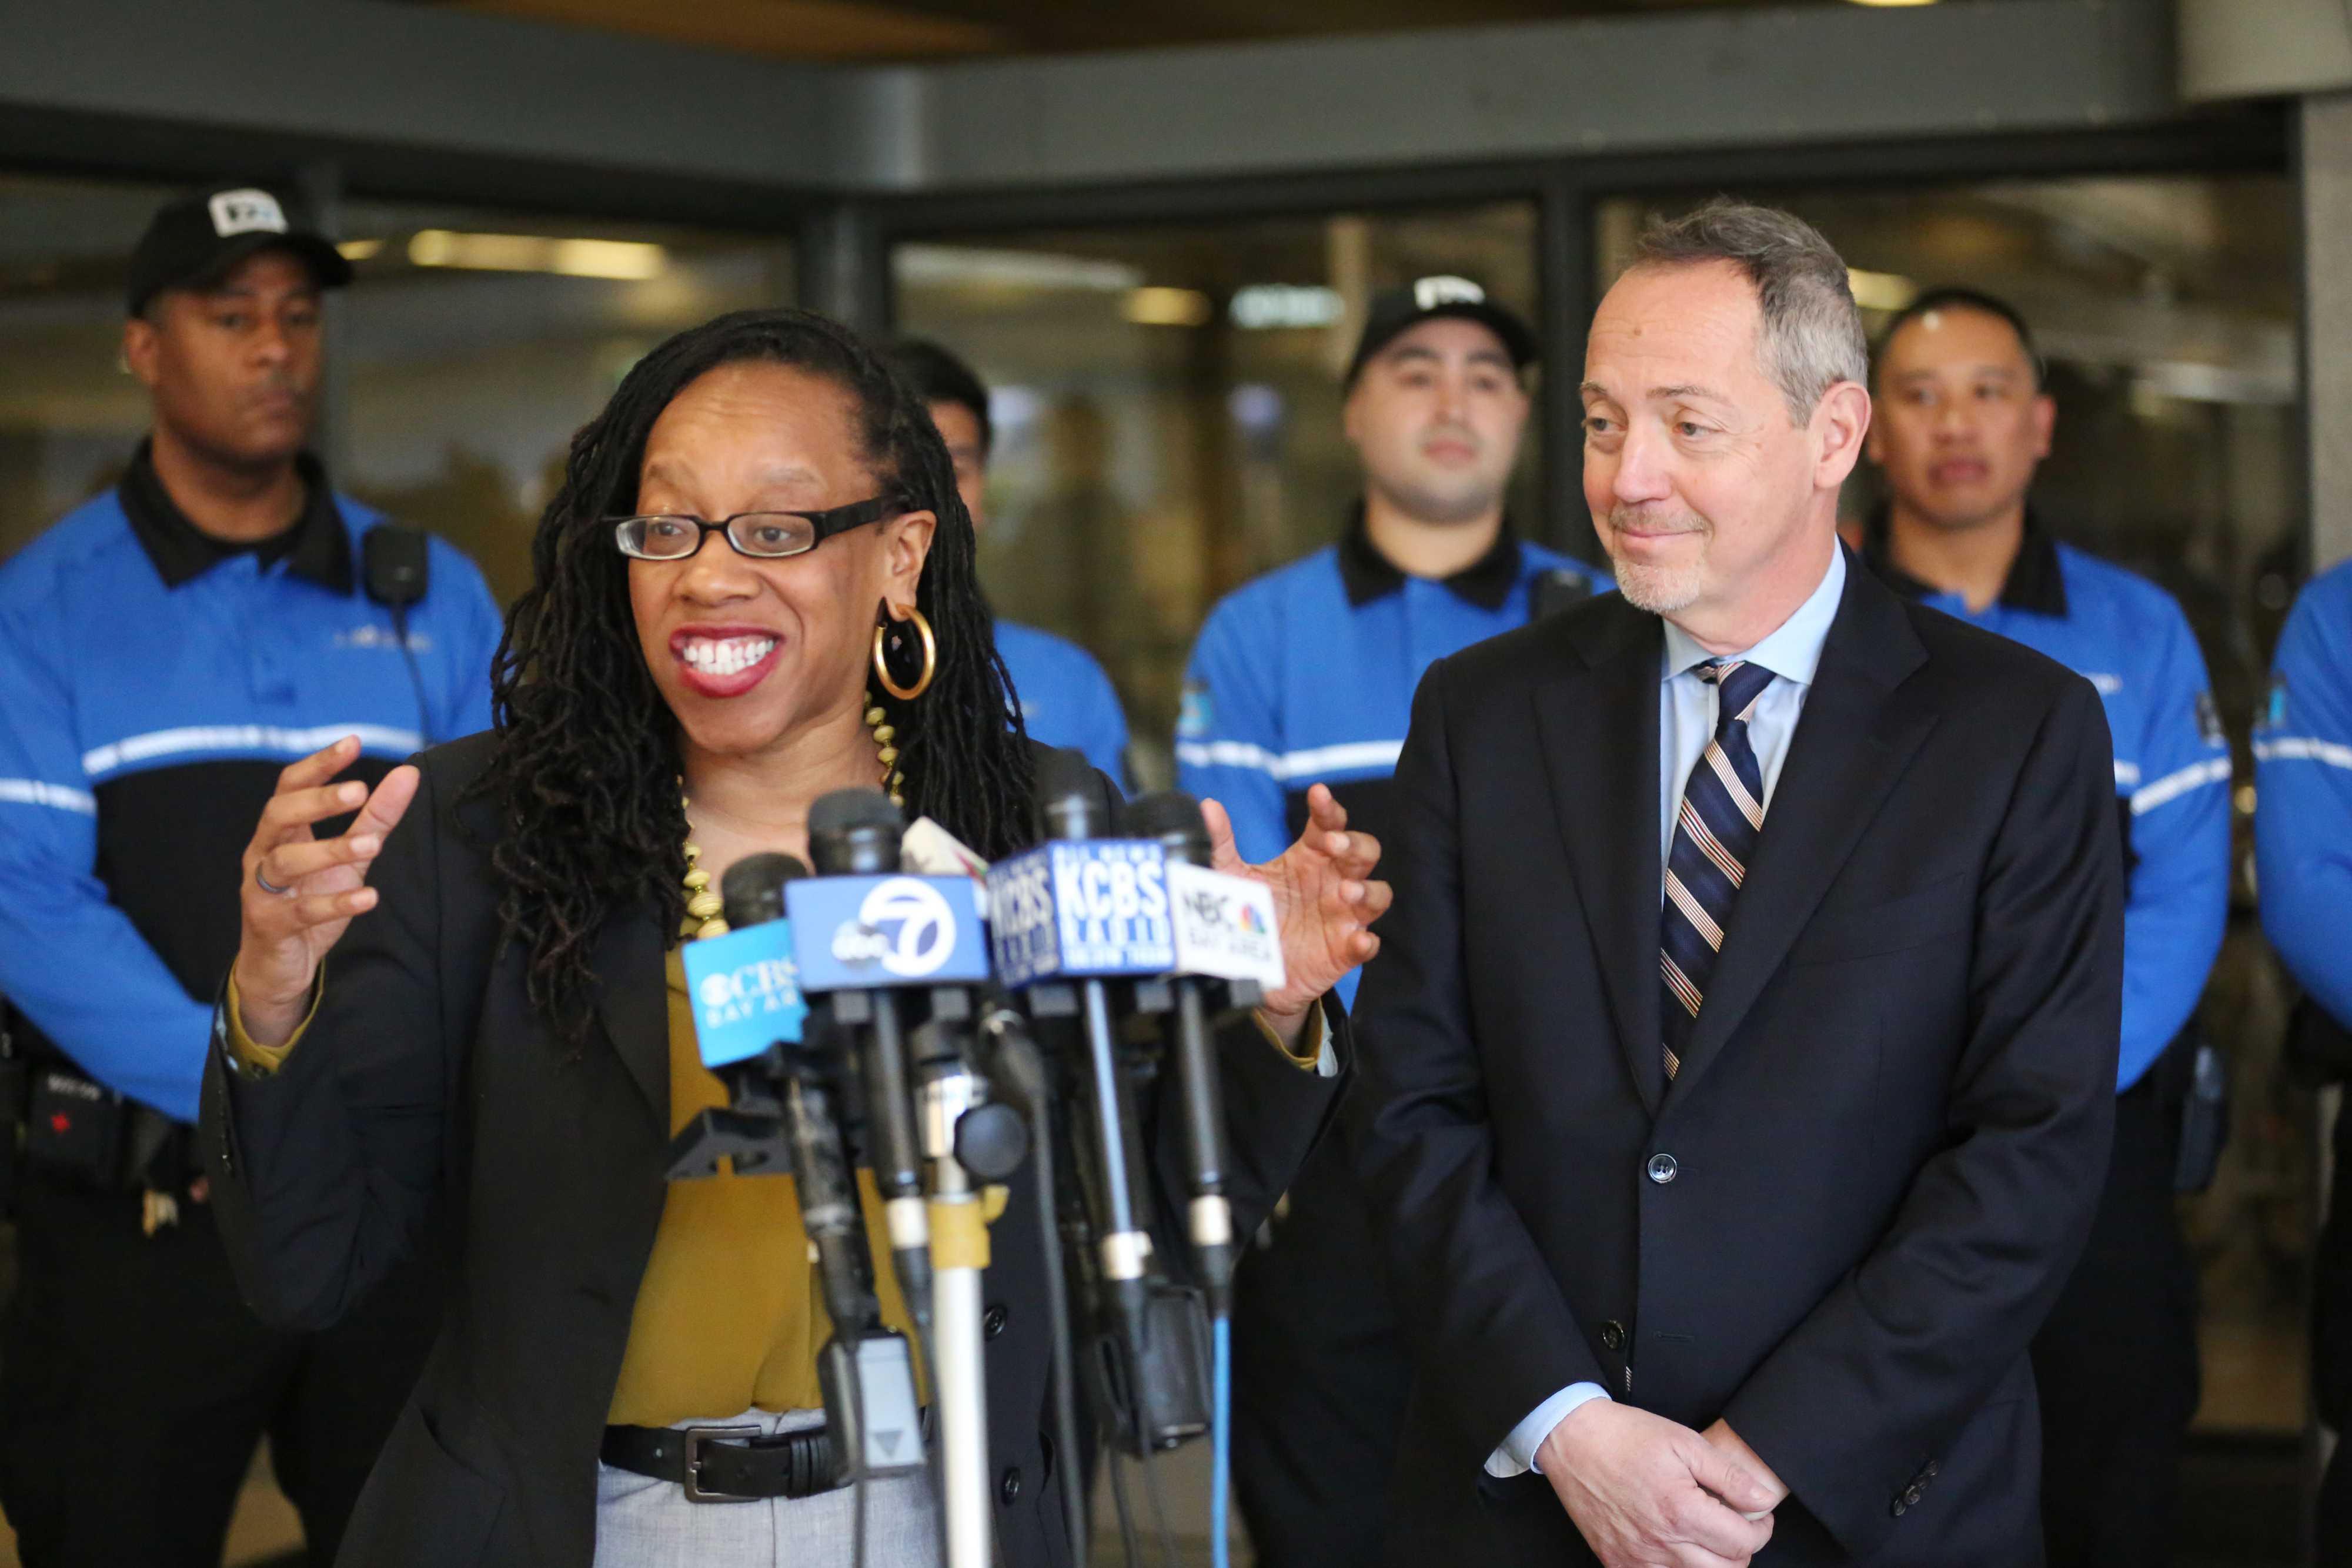 BART Board President Lateefah Simon and Board Member Bevan Dufty at press conference